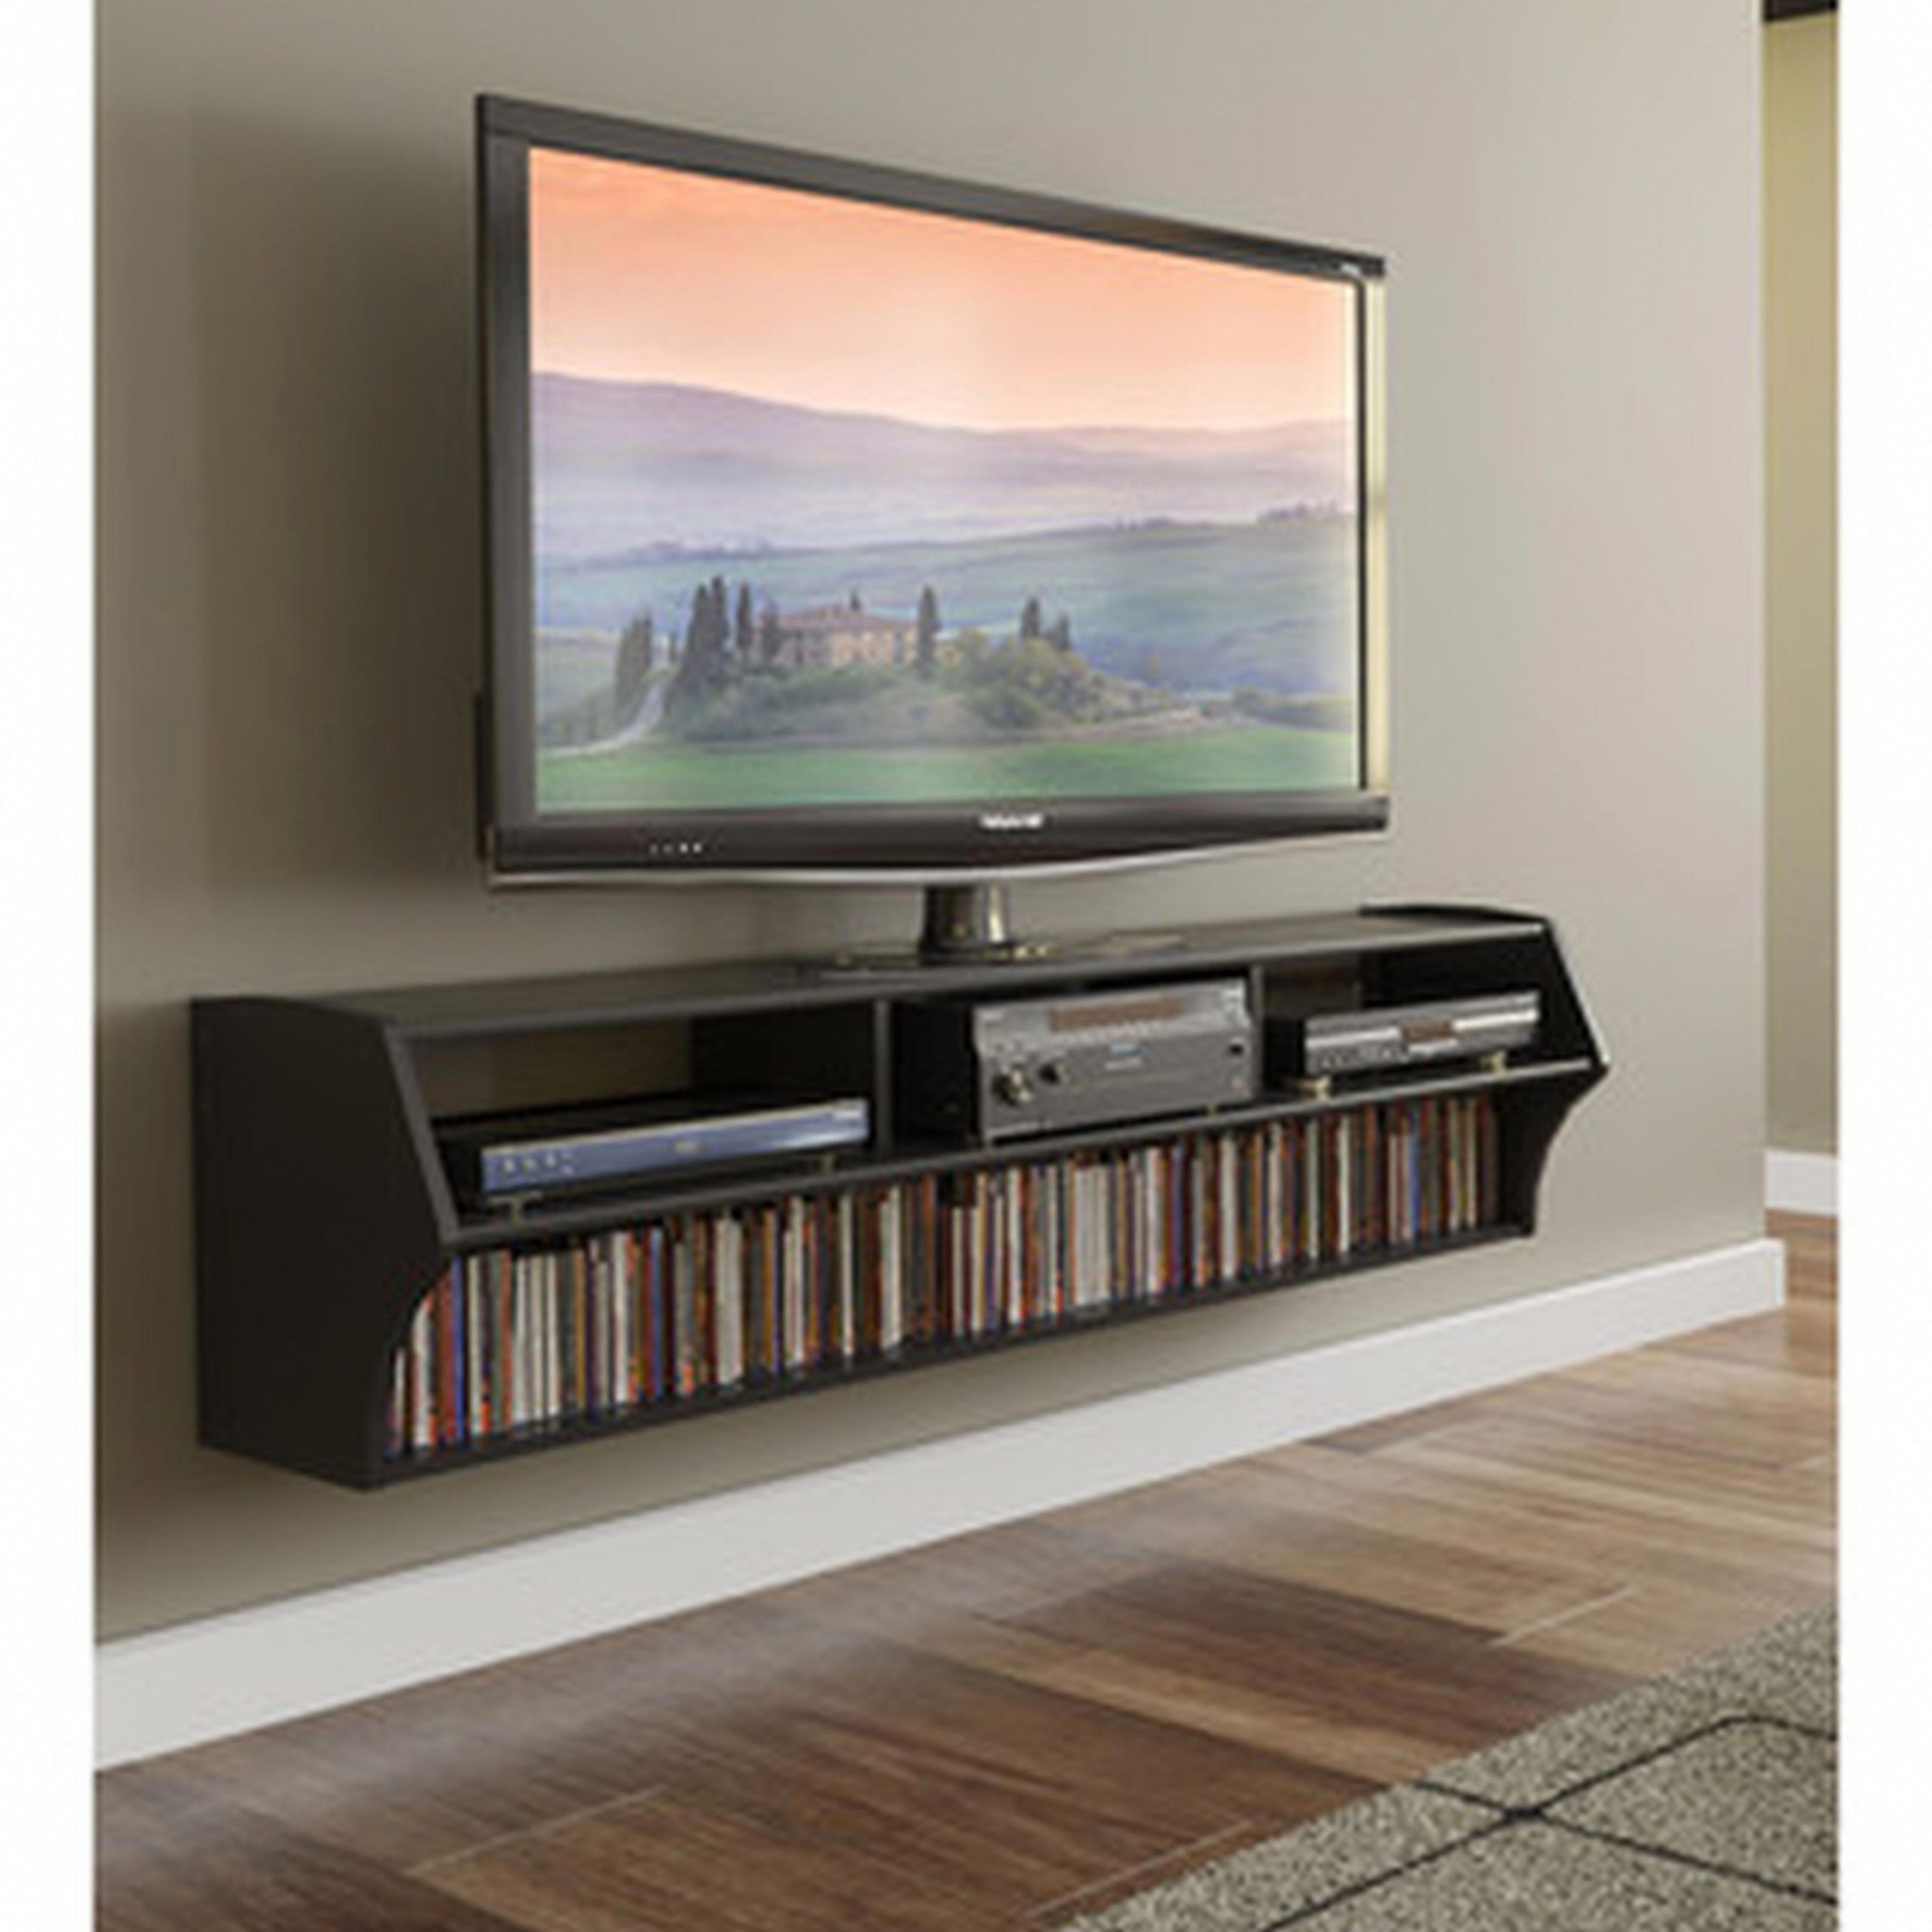 Cool Tv Stand Designs For Your Home #tvstand #homedecor # With Funky Tv Cabinets (View 1 of 15)